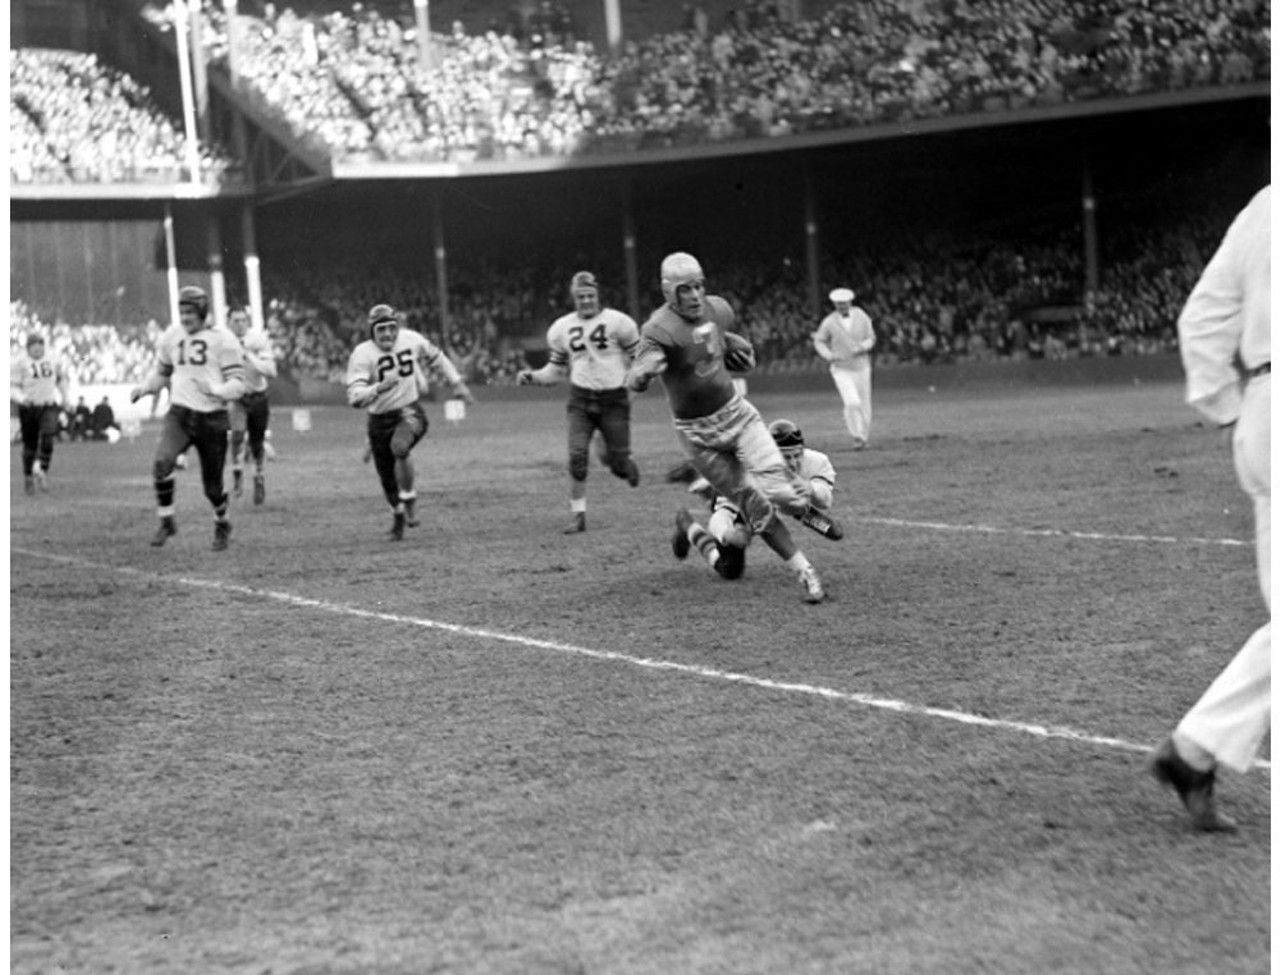 Another shot from the 1939 game against the Chicago Bears.